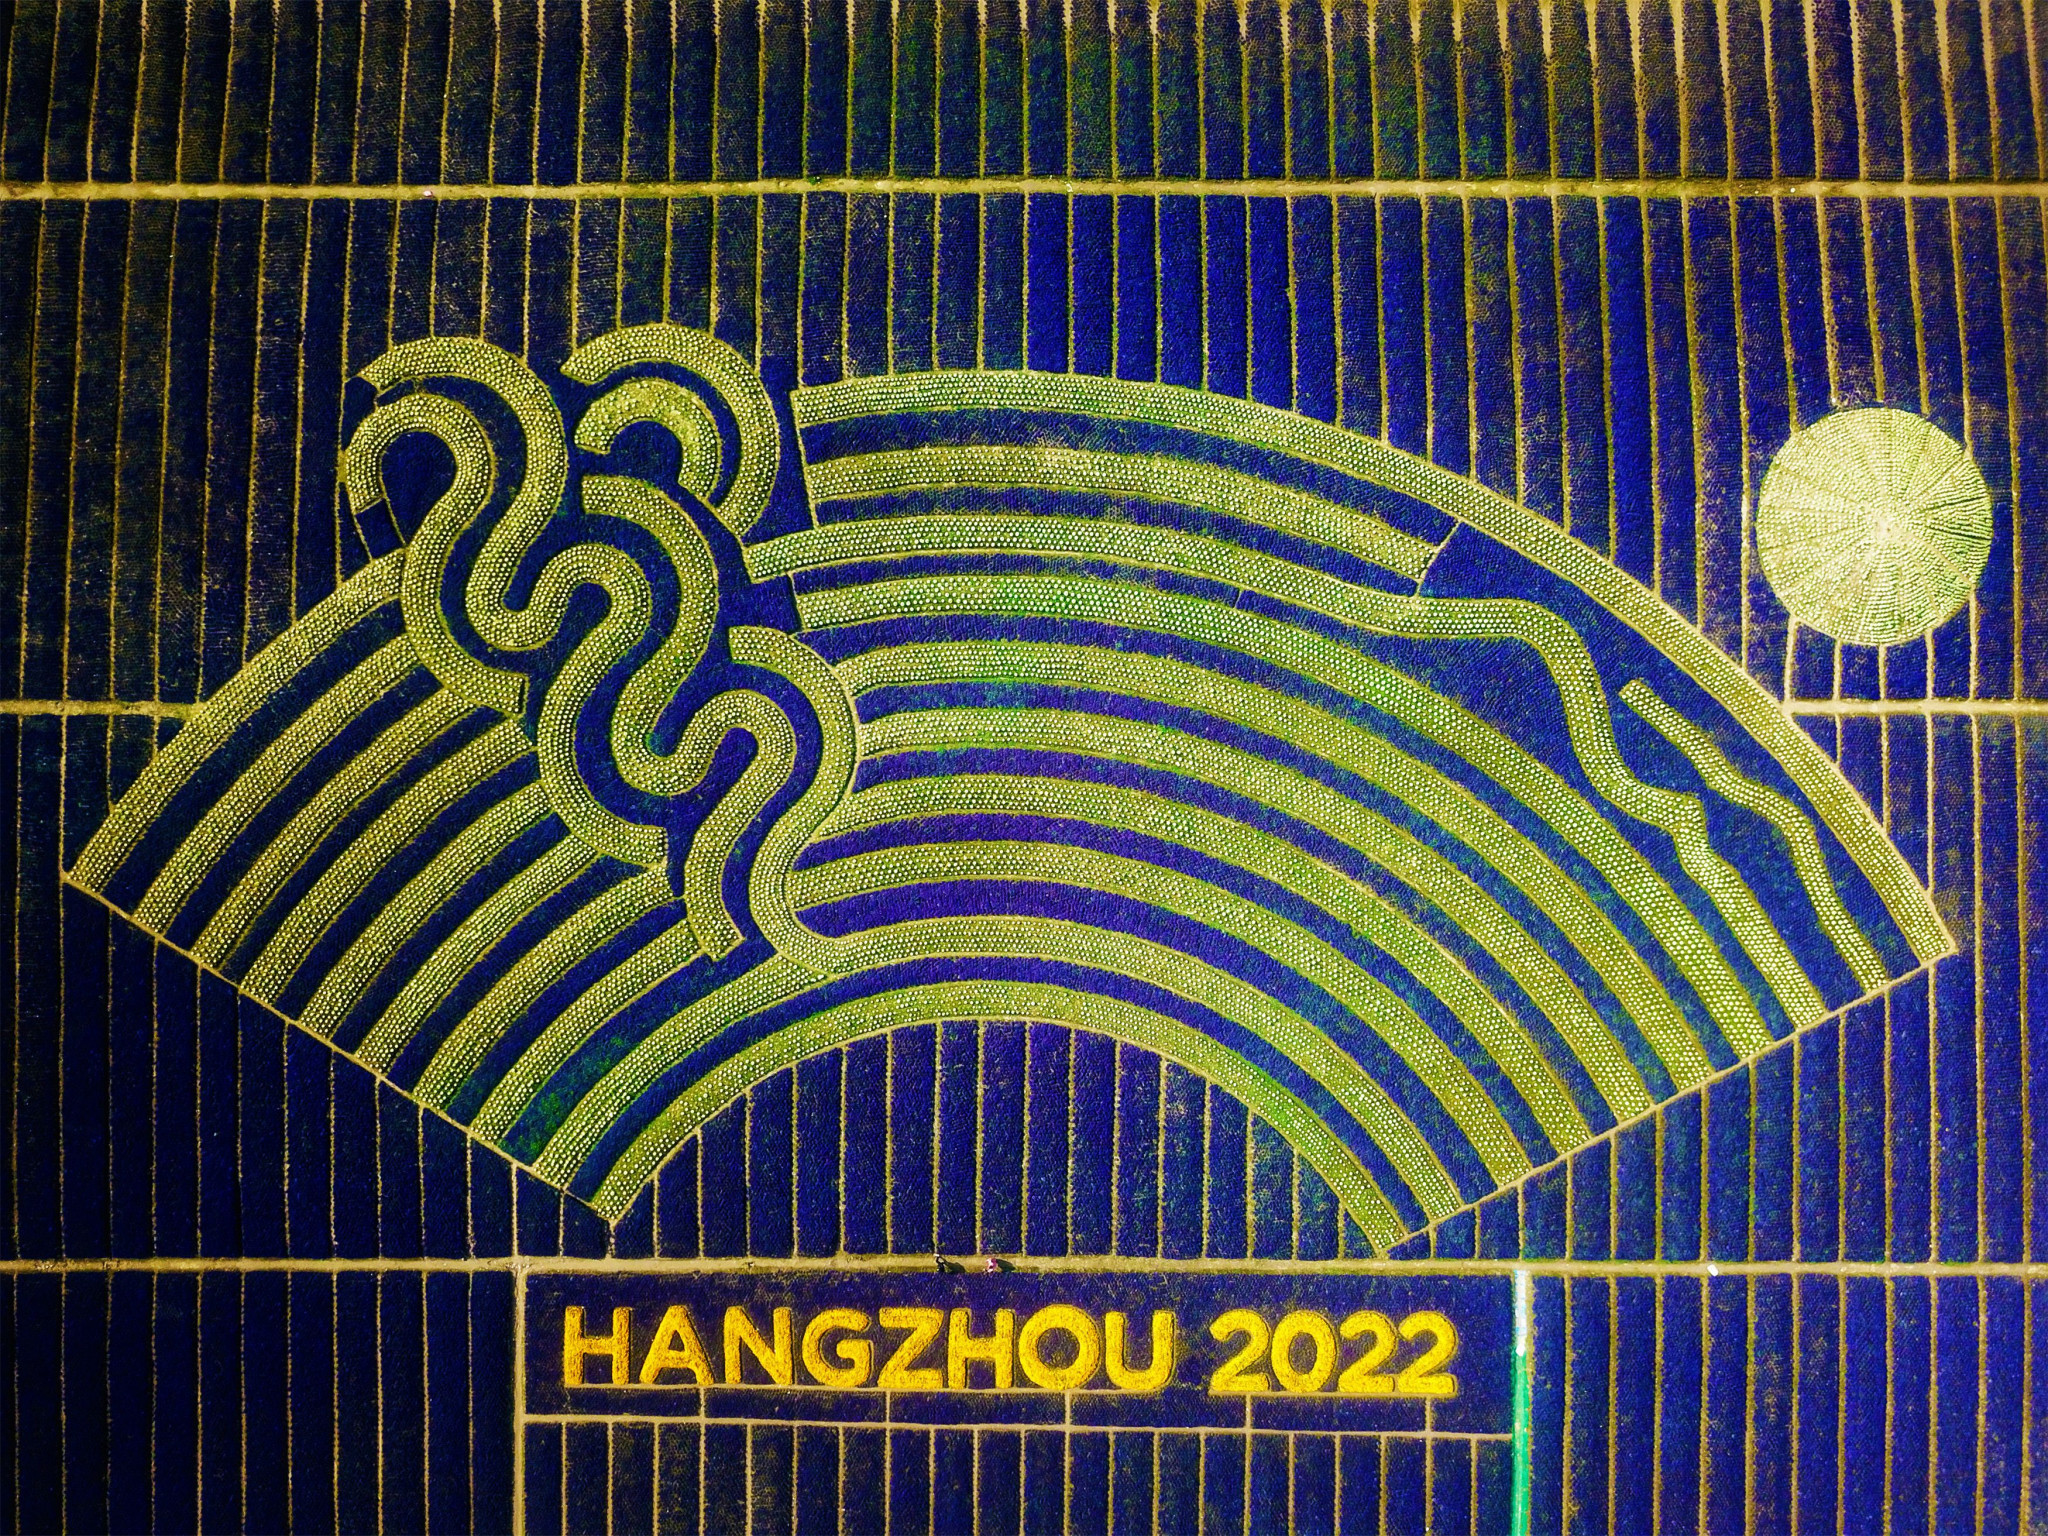 Hangzhou 2022 is set to be the third time that China hosts the Asian Games ©Getty Images